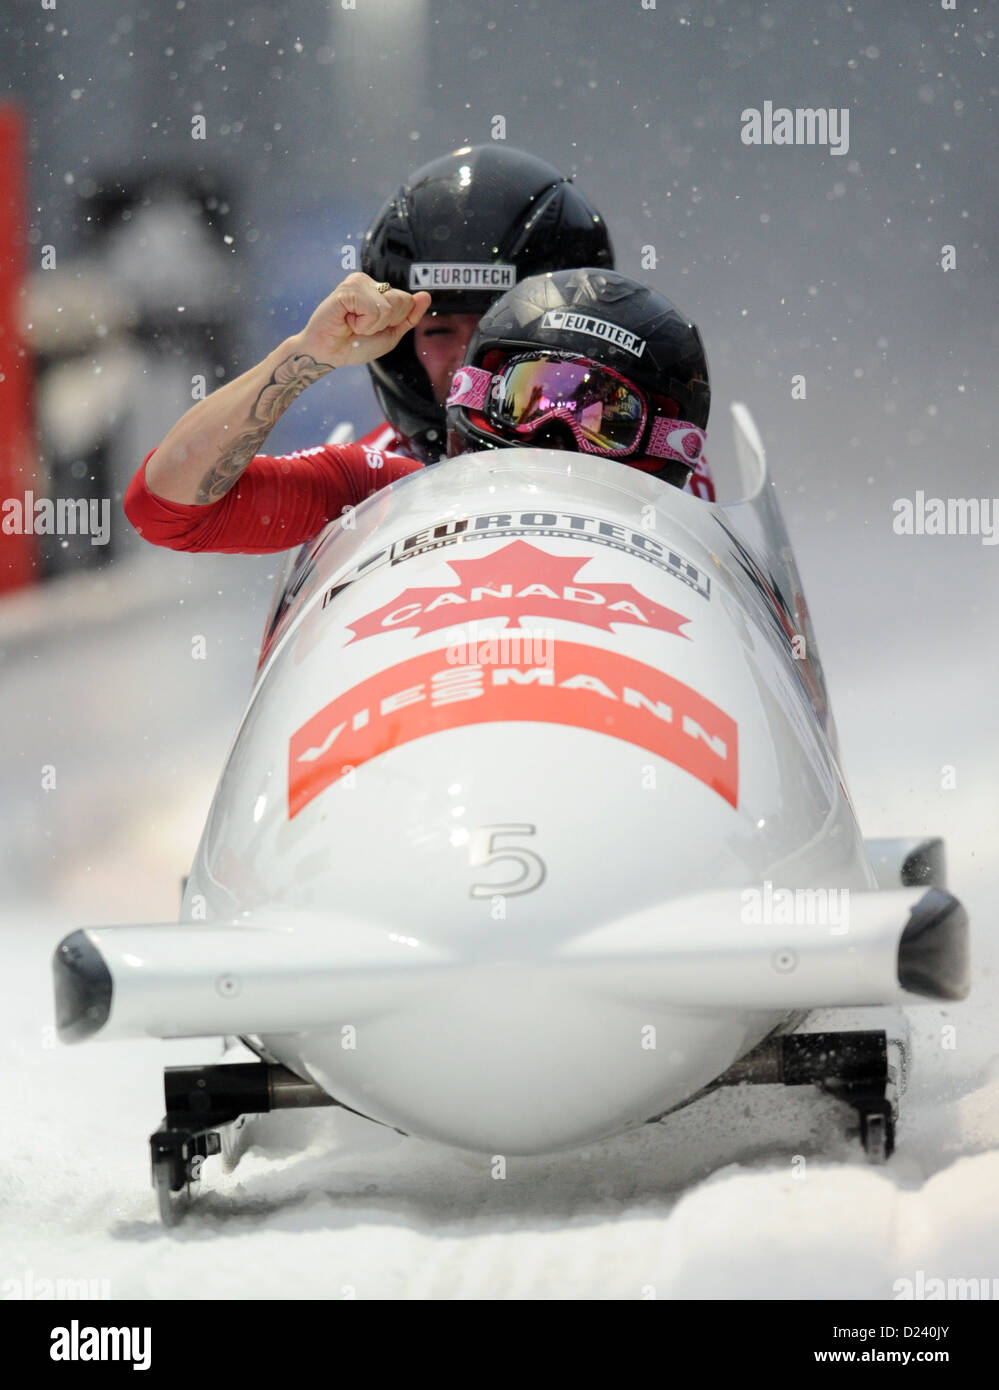 Canadian bobbers Kaillie Humphries and Chelsea Valois cross the fininshing line during the women's two-person bobsleigh world cup at the artificial ice track at Koenigssee near Berchtesgarden, Germany, 11 January 2013. Humphries and Valois gained first place. Photo: TOBIAS HASE Stock Photo